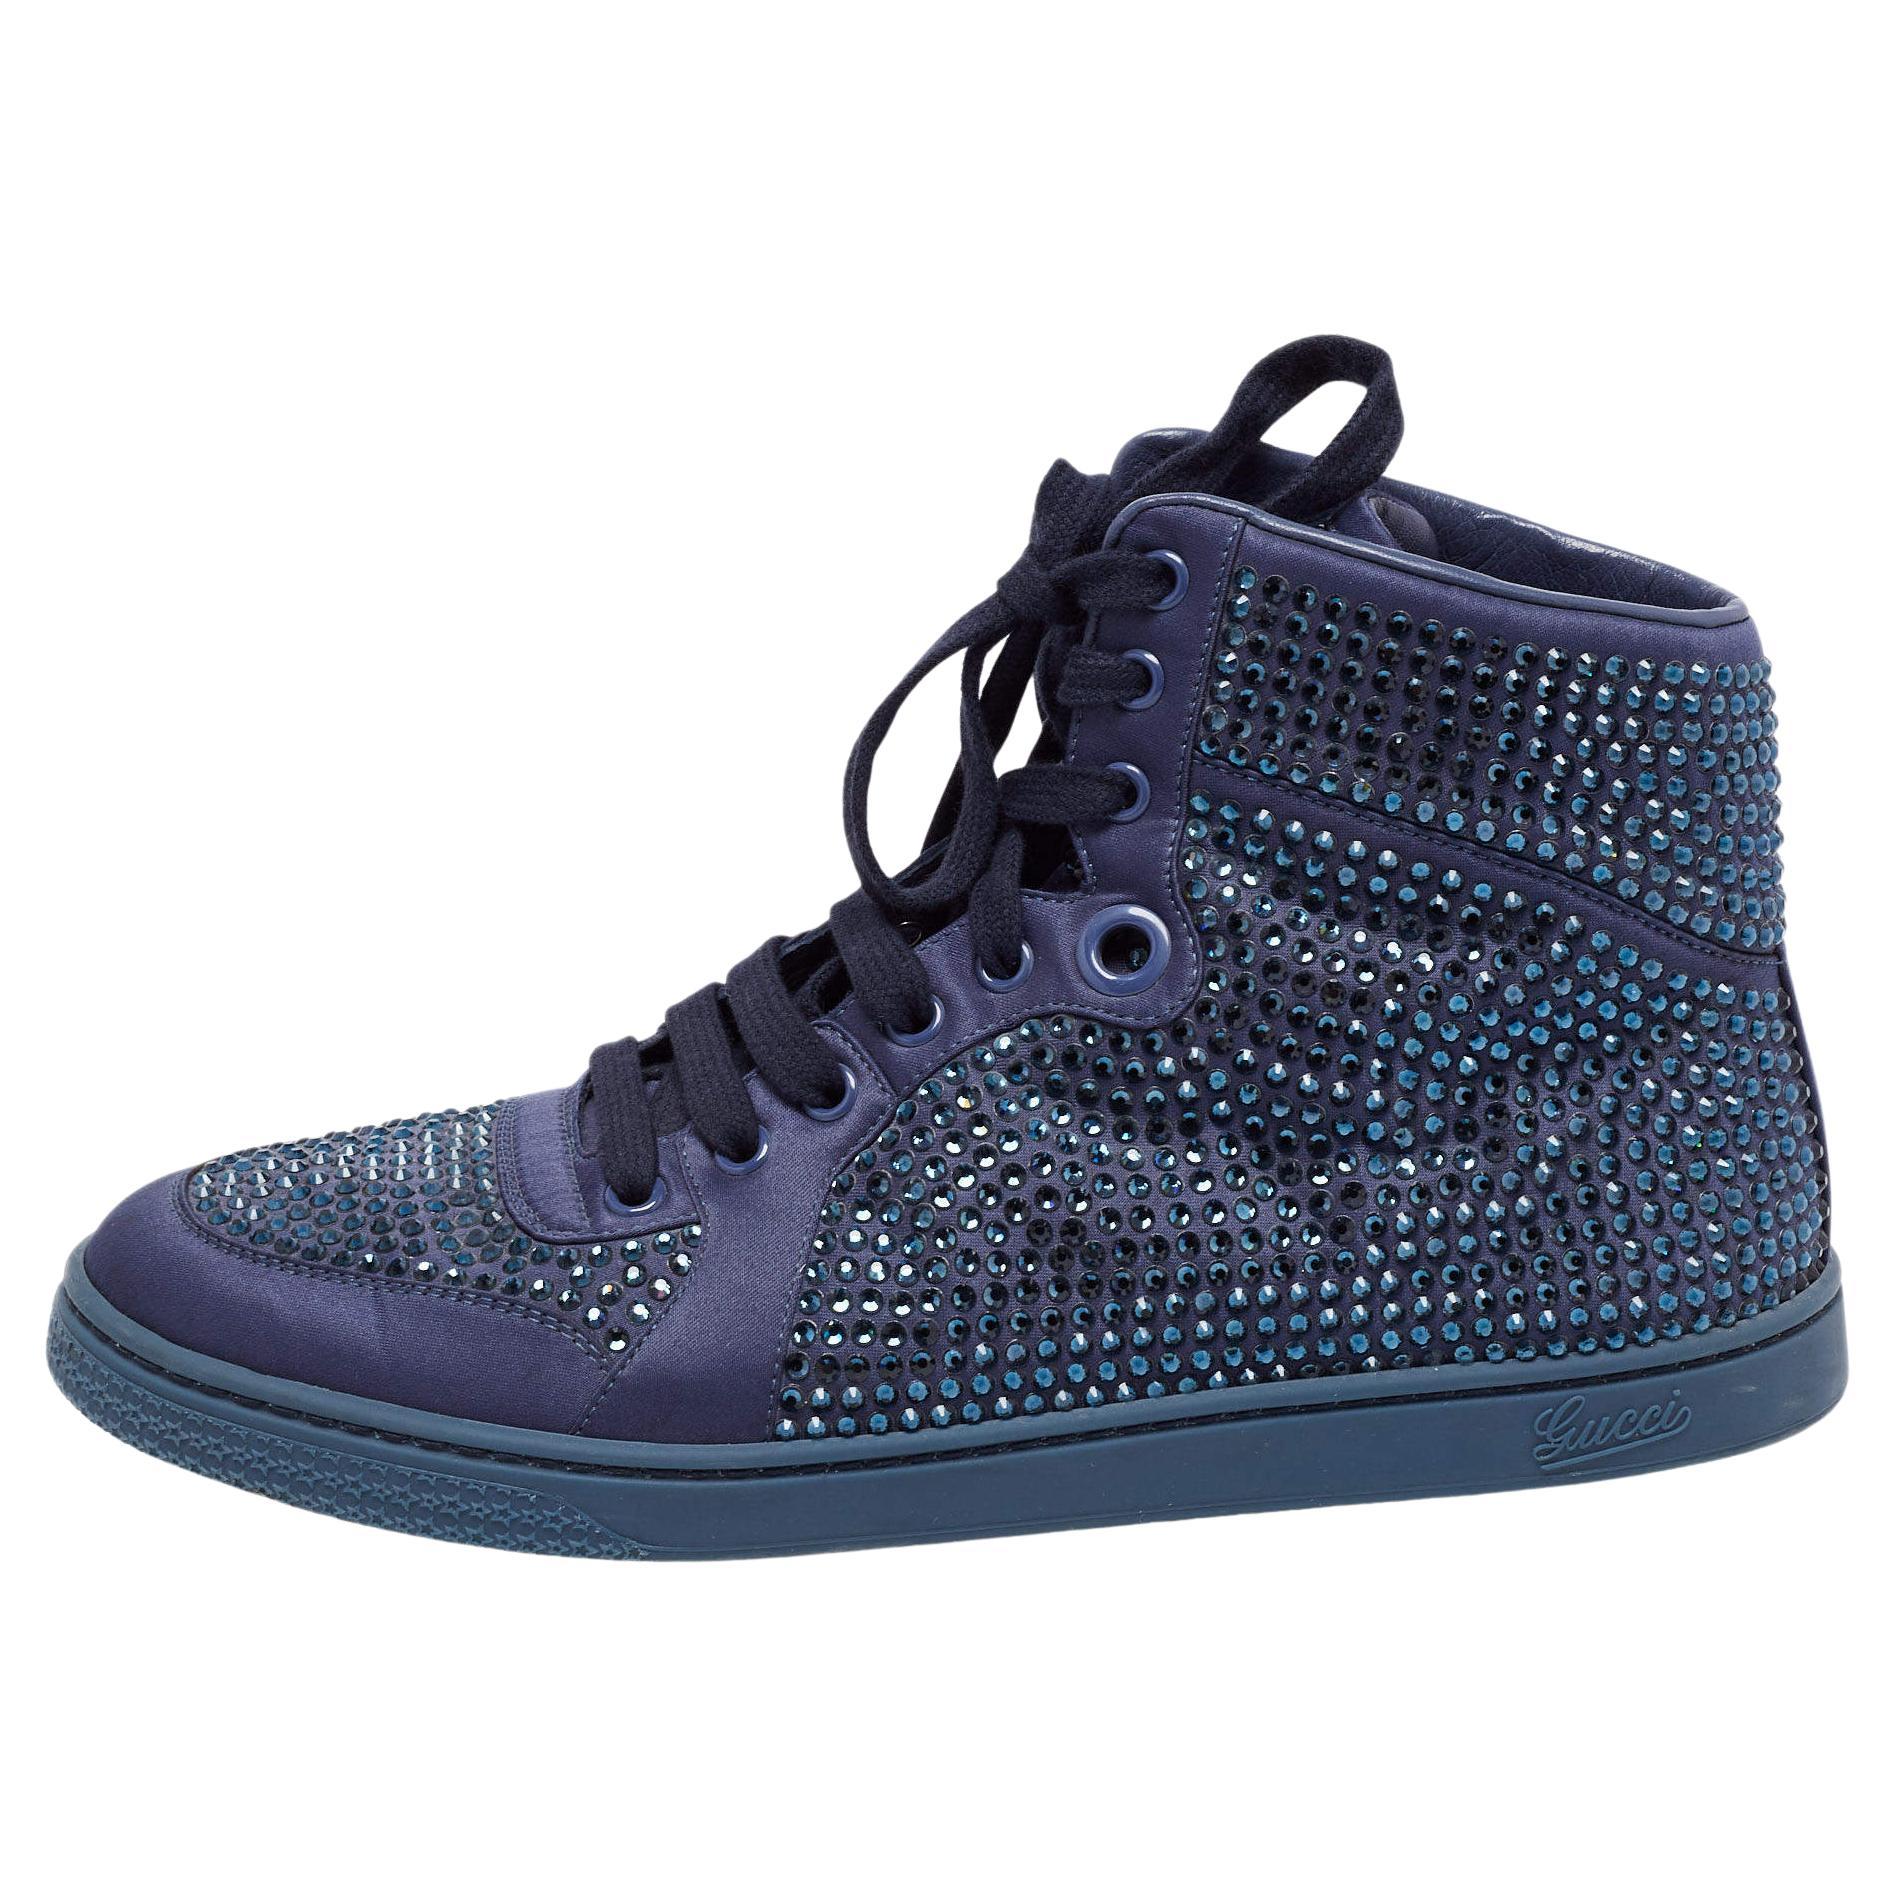 Gucci Blue Satin Crystal Embellished High Top Sneakers Size 39.5 For Sale